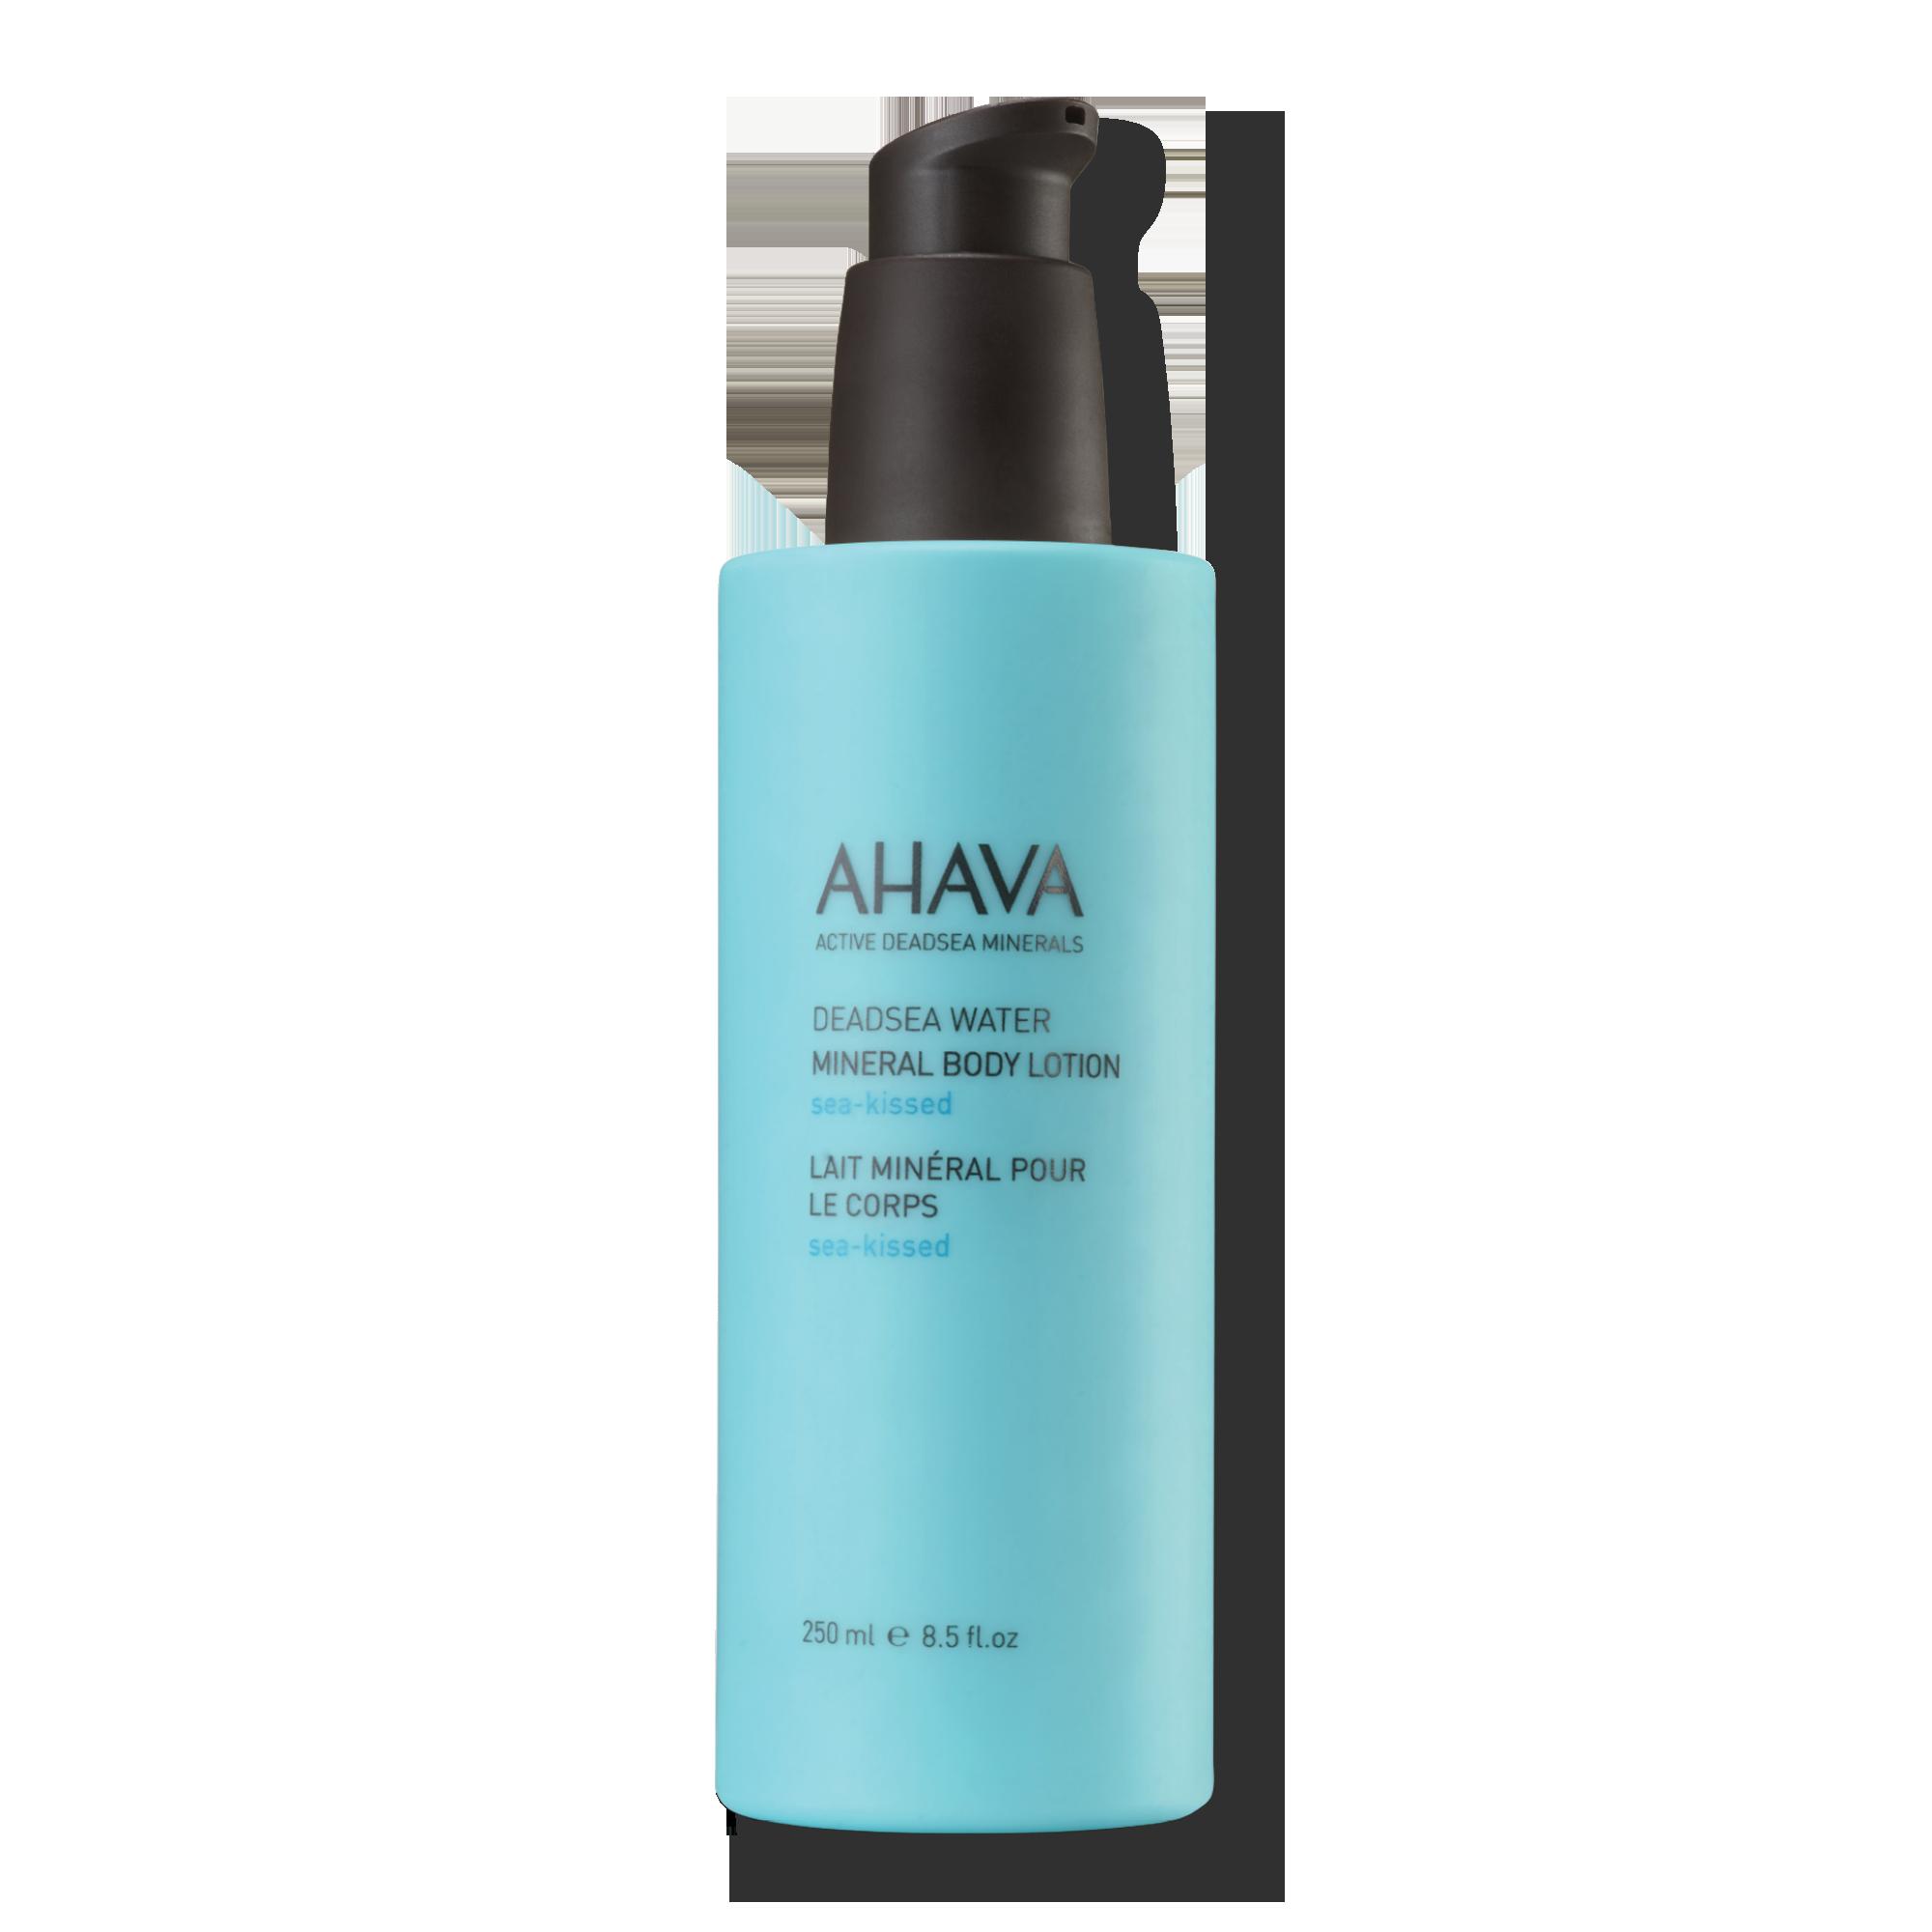 salebath.com - Shop at Ahava Discount Online Mineral Body Lotion Sea-Kissed  for great prices and free shipping on orders of $80 or more